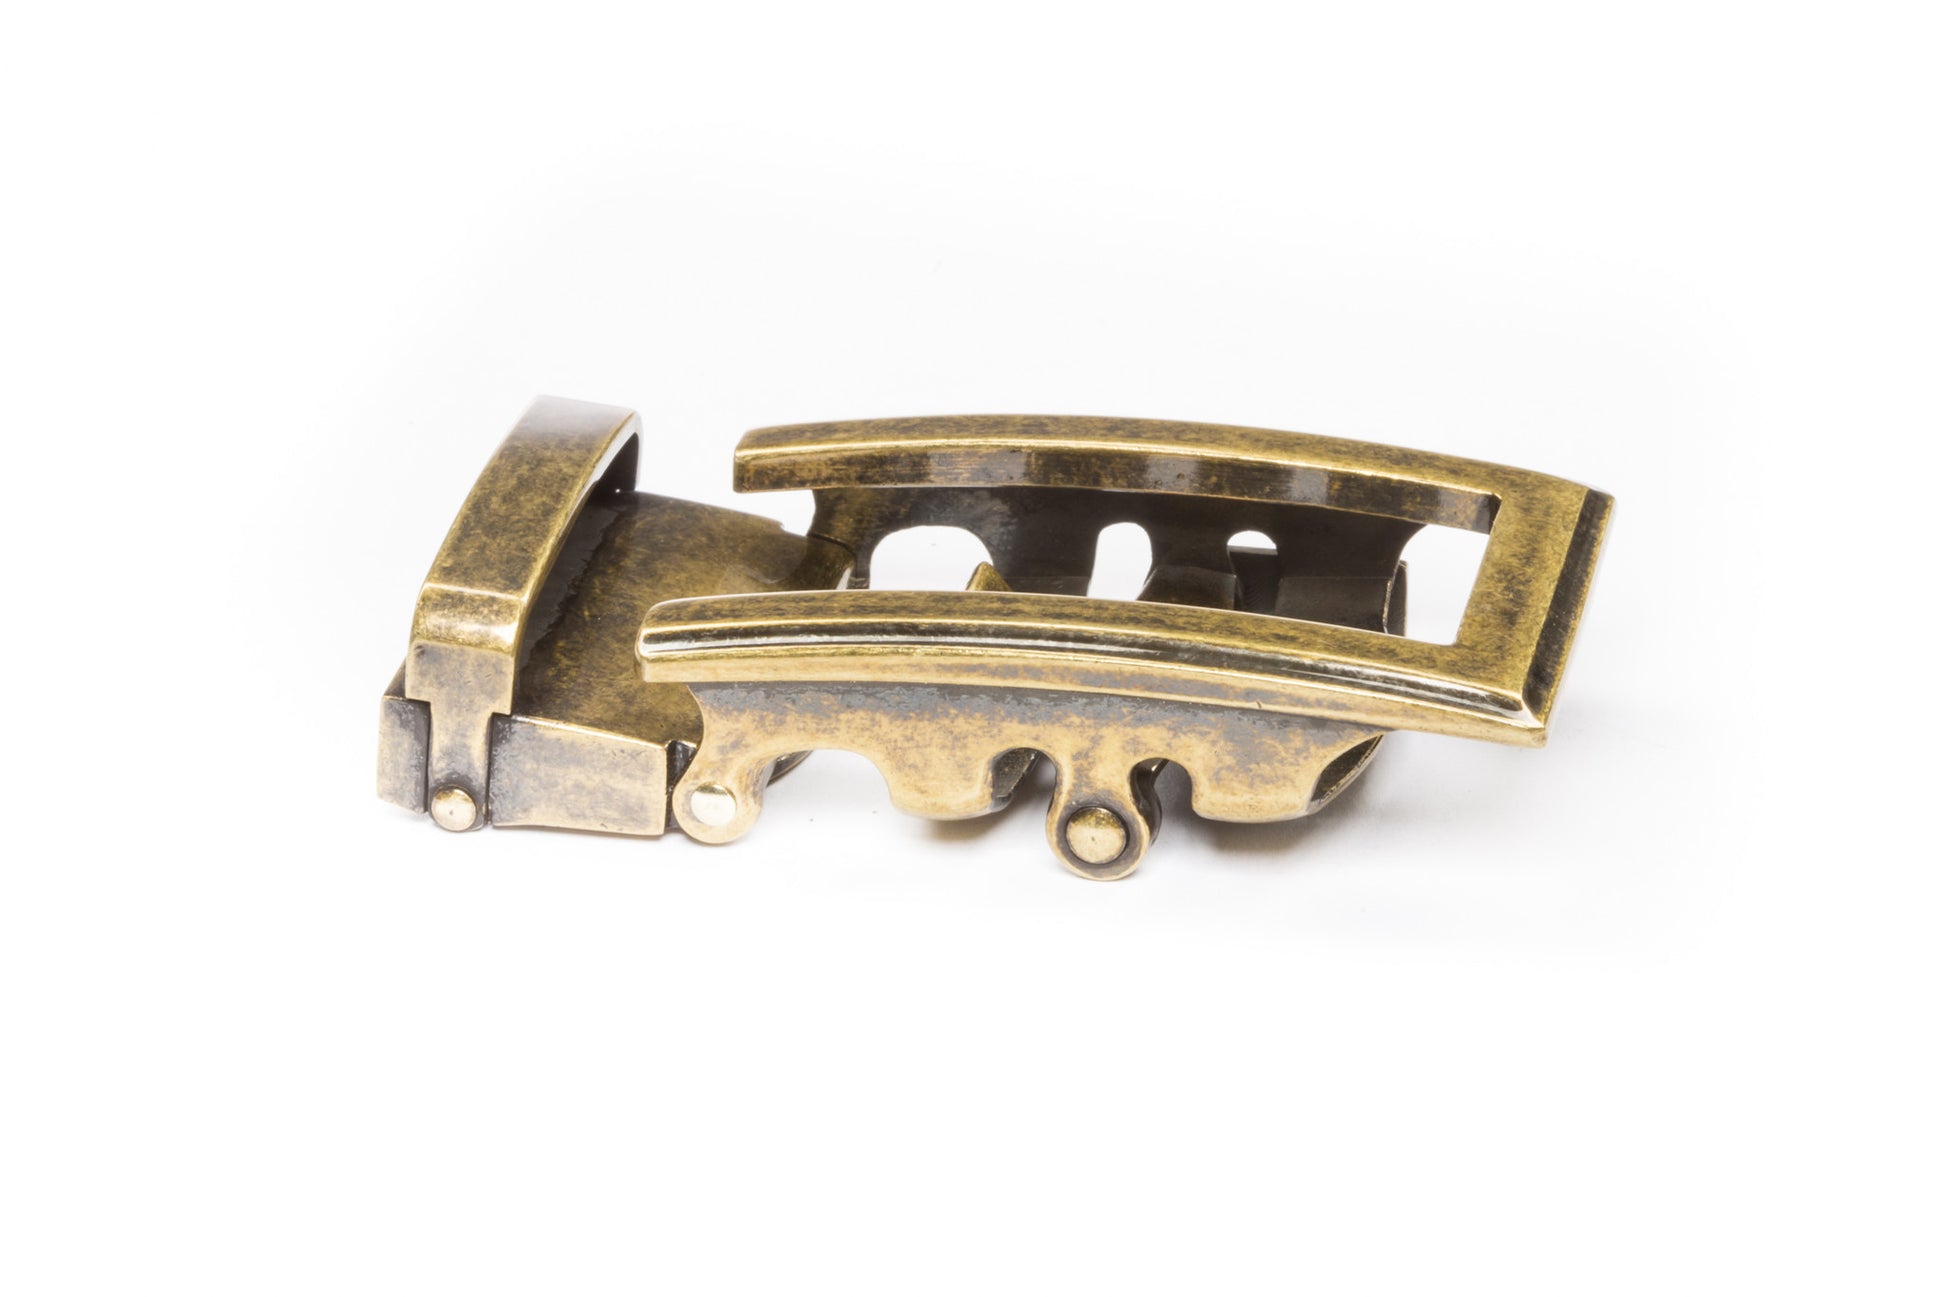 Men's traditional ratchet belt buckle in antiqued gold with a width of 1.5 inches, right side view.